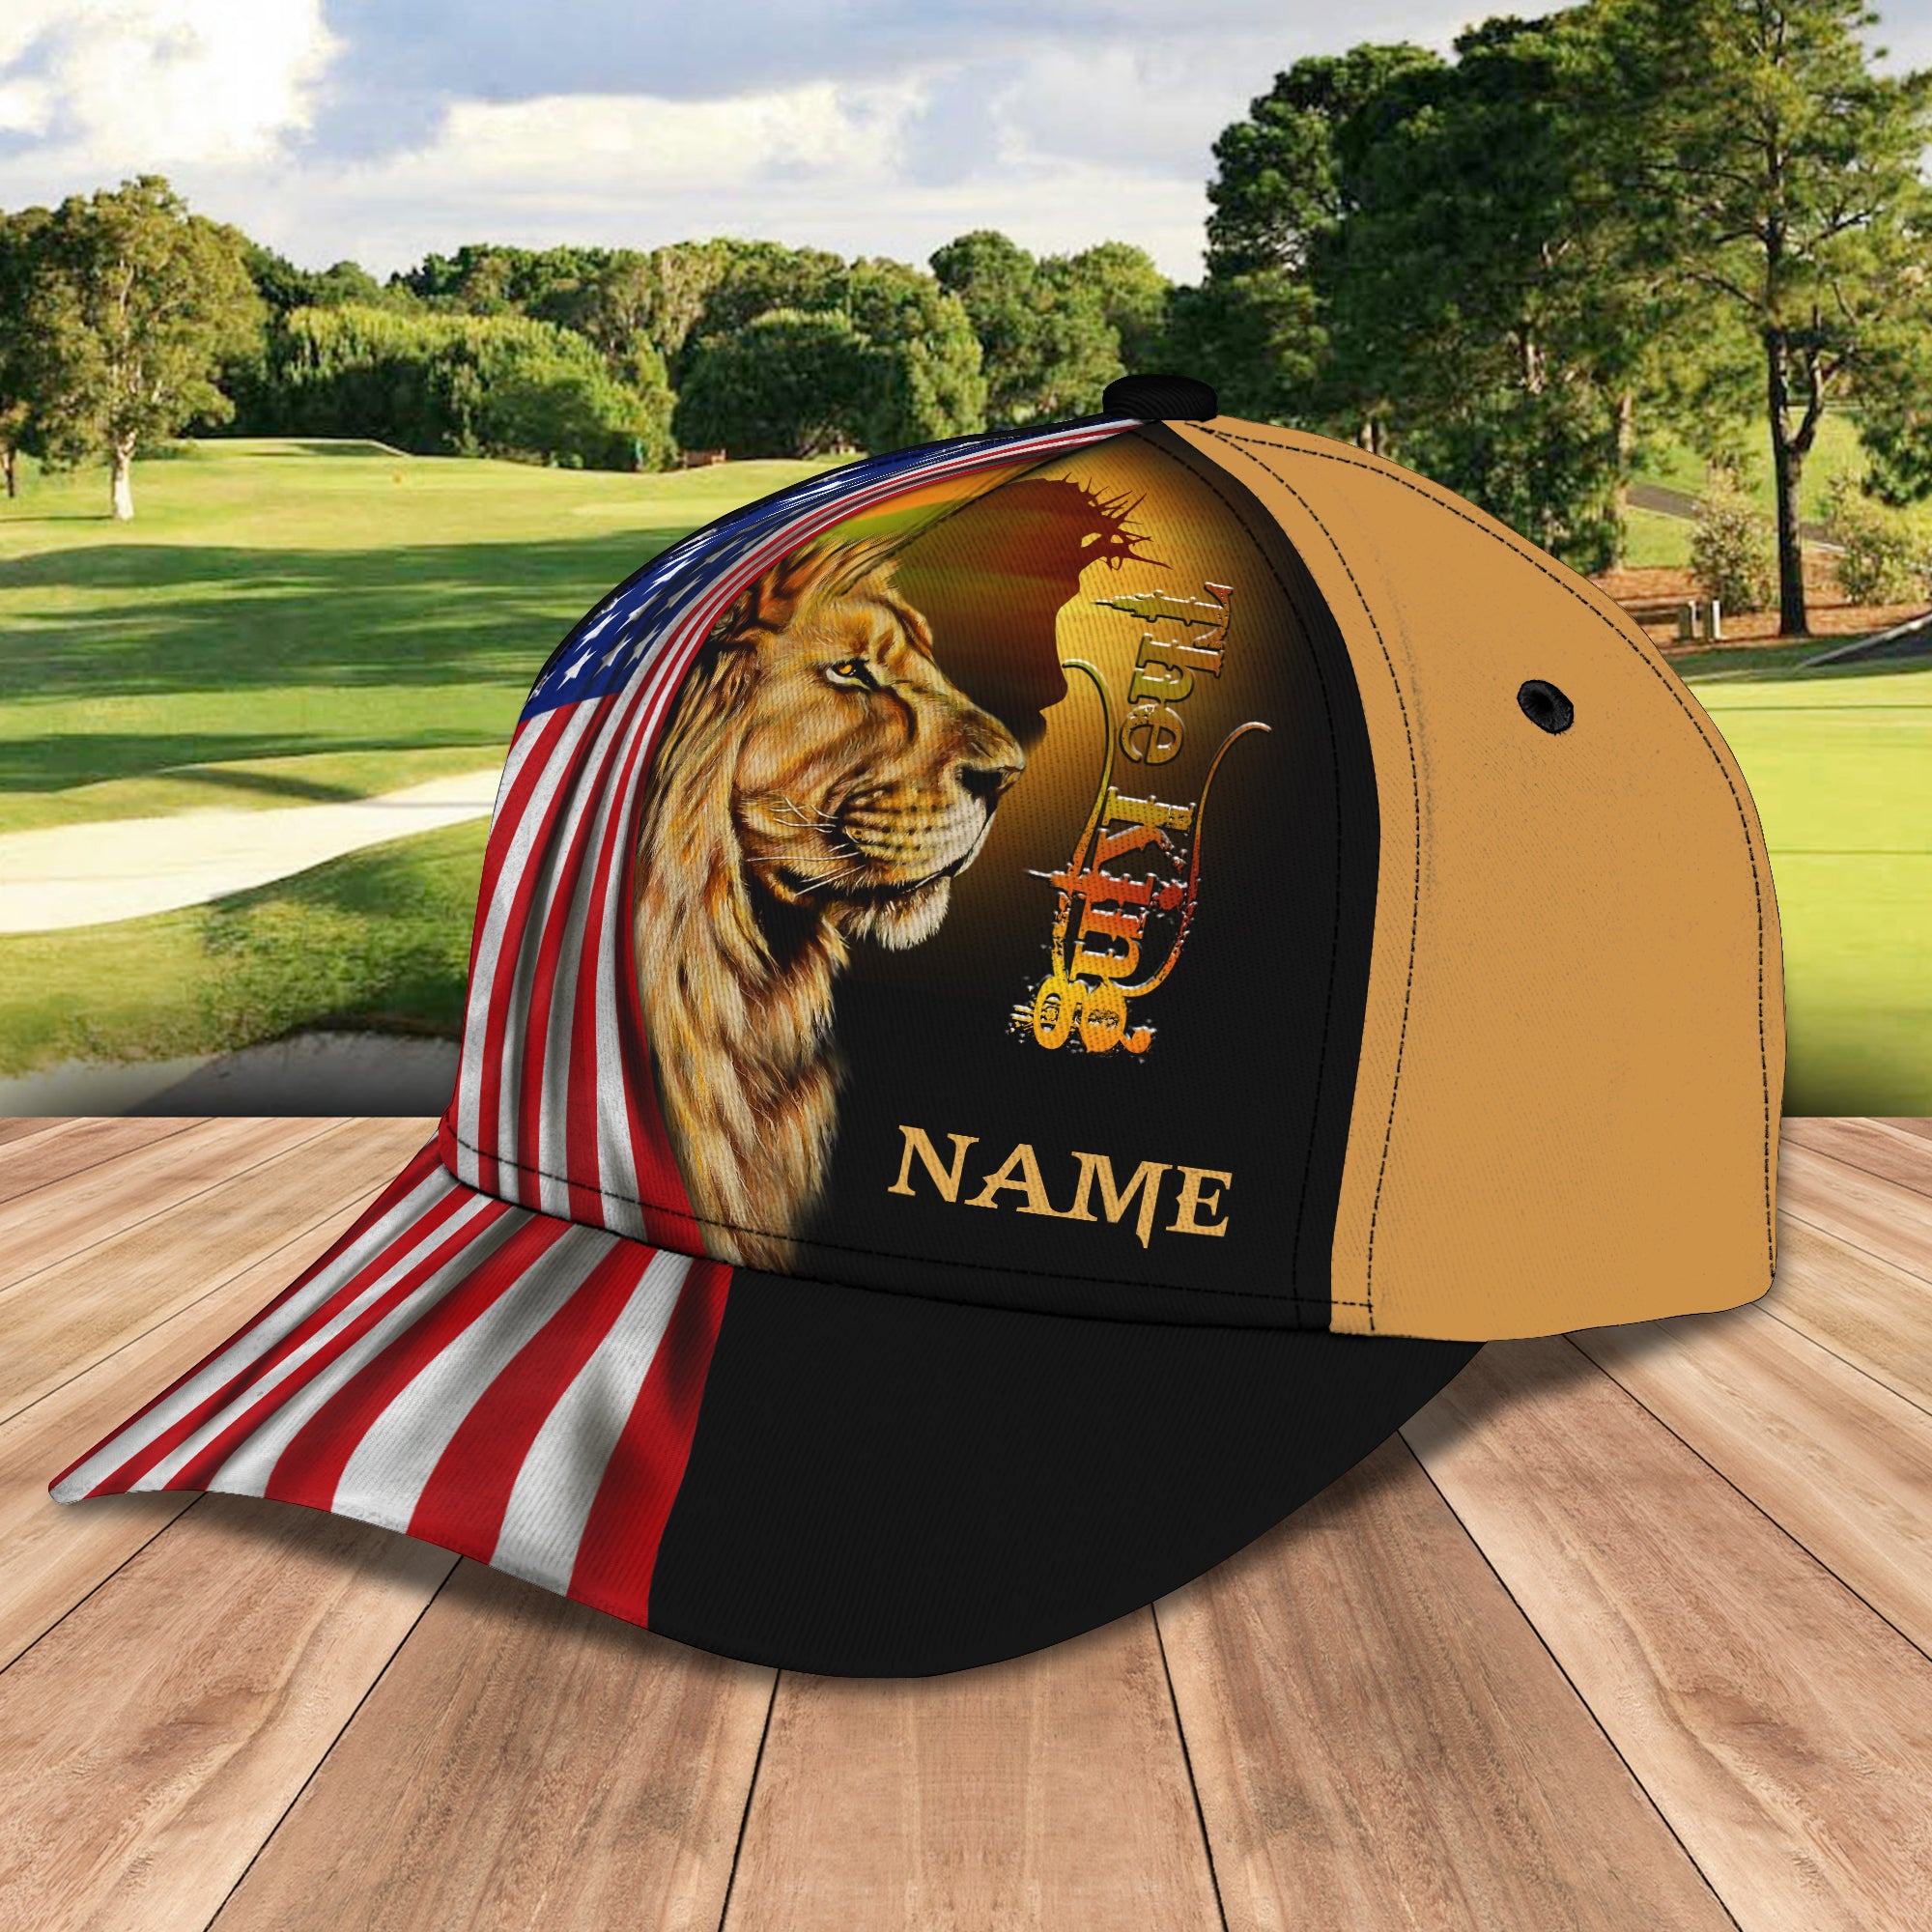 The King - Personalized Name Cap - Urt96